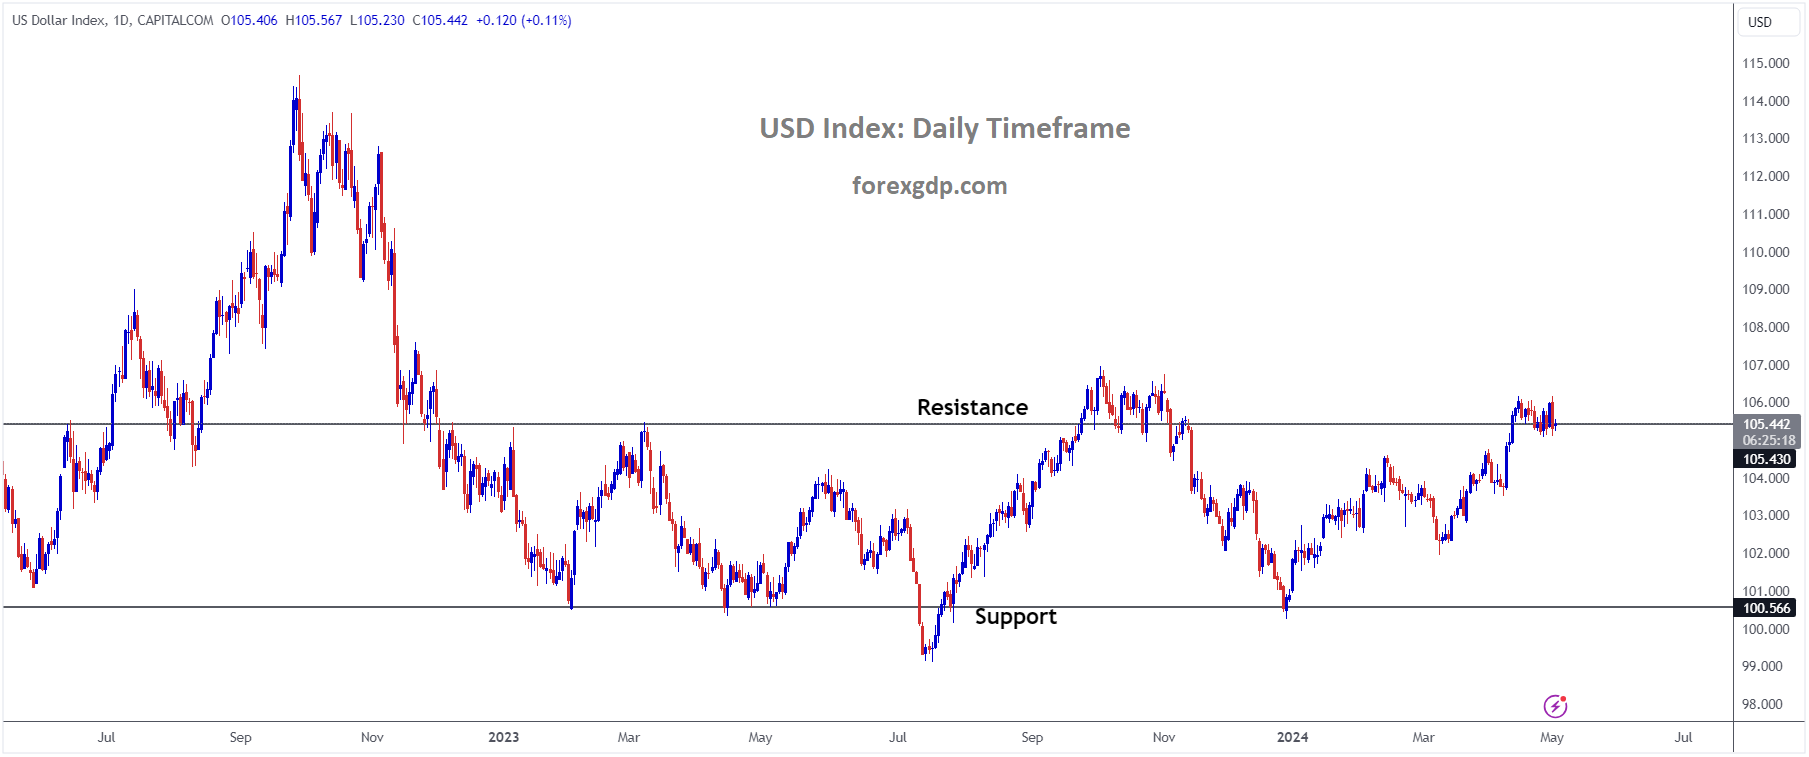 USD Index Market Price is moving in Ascending channel and market has reached resistance area of the channel